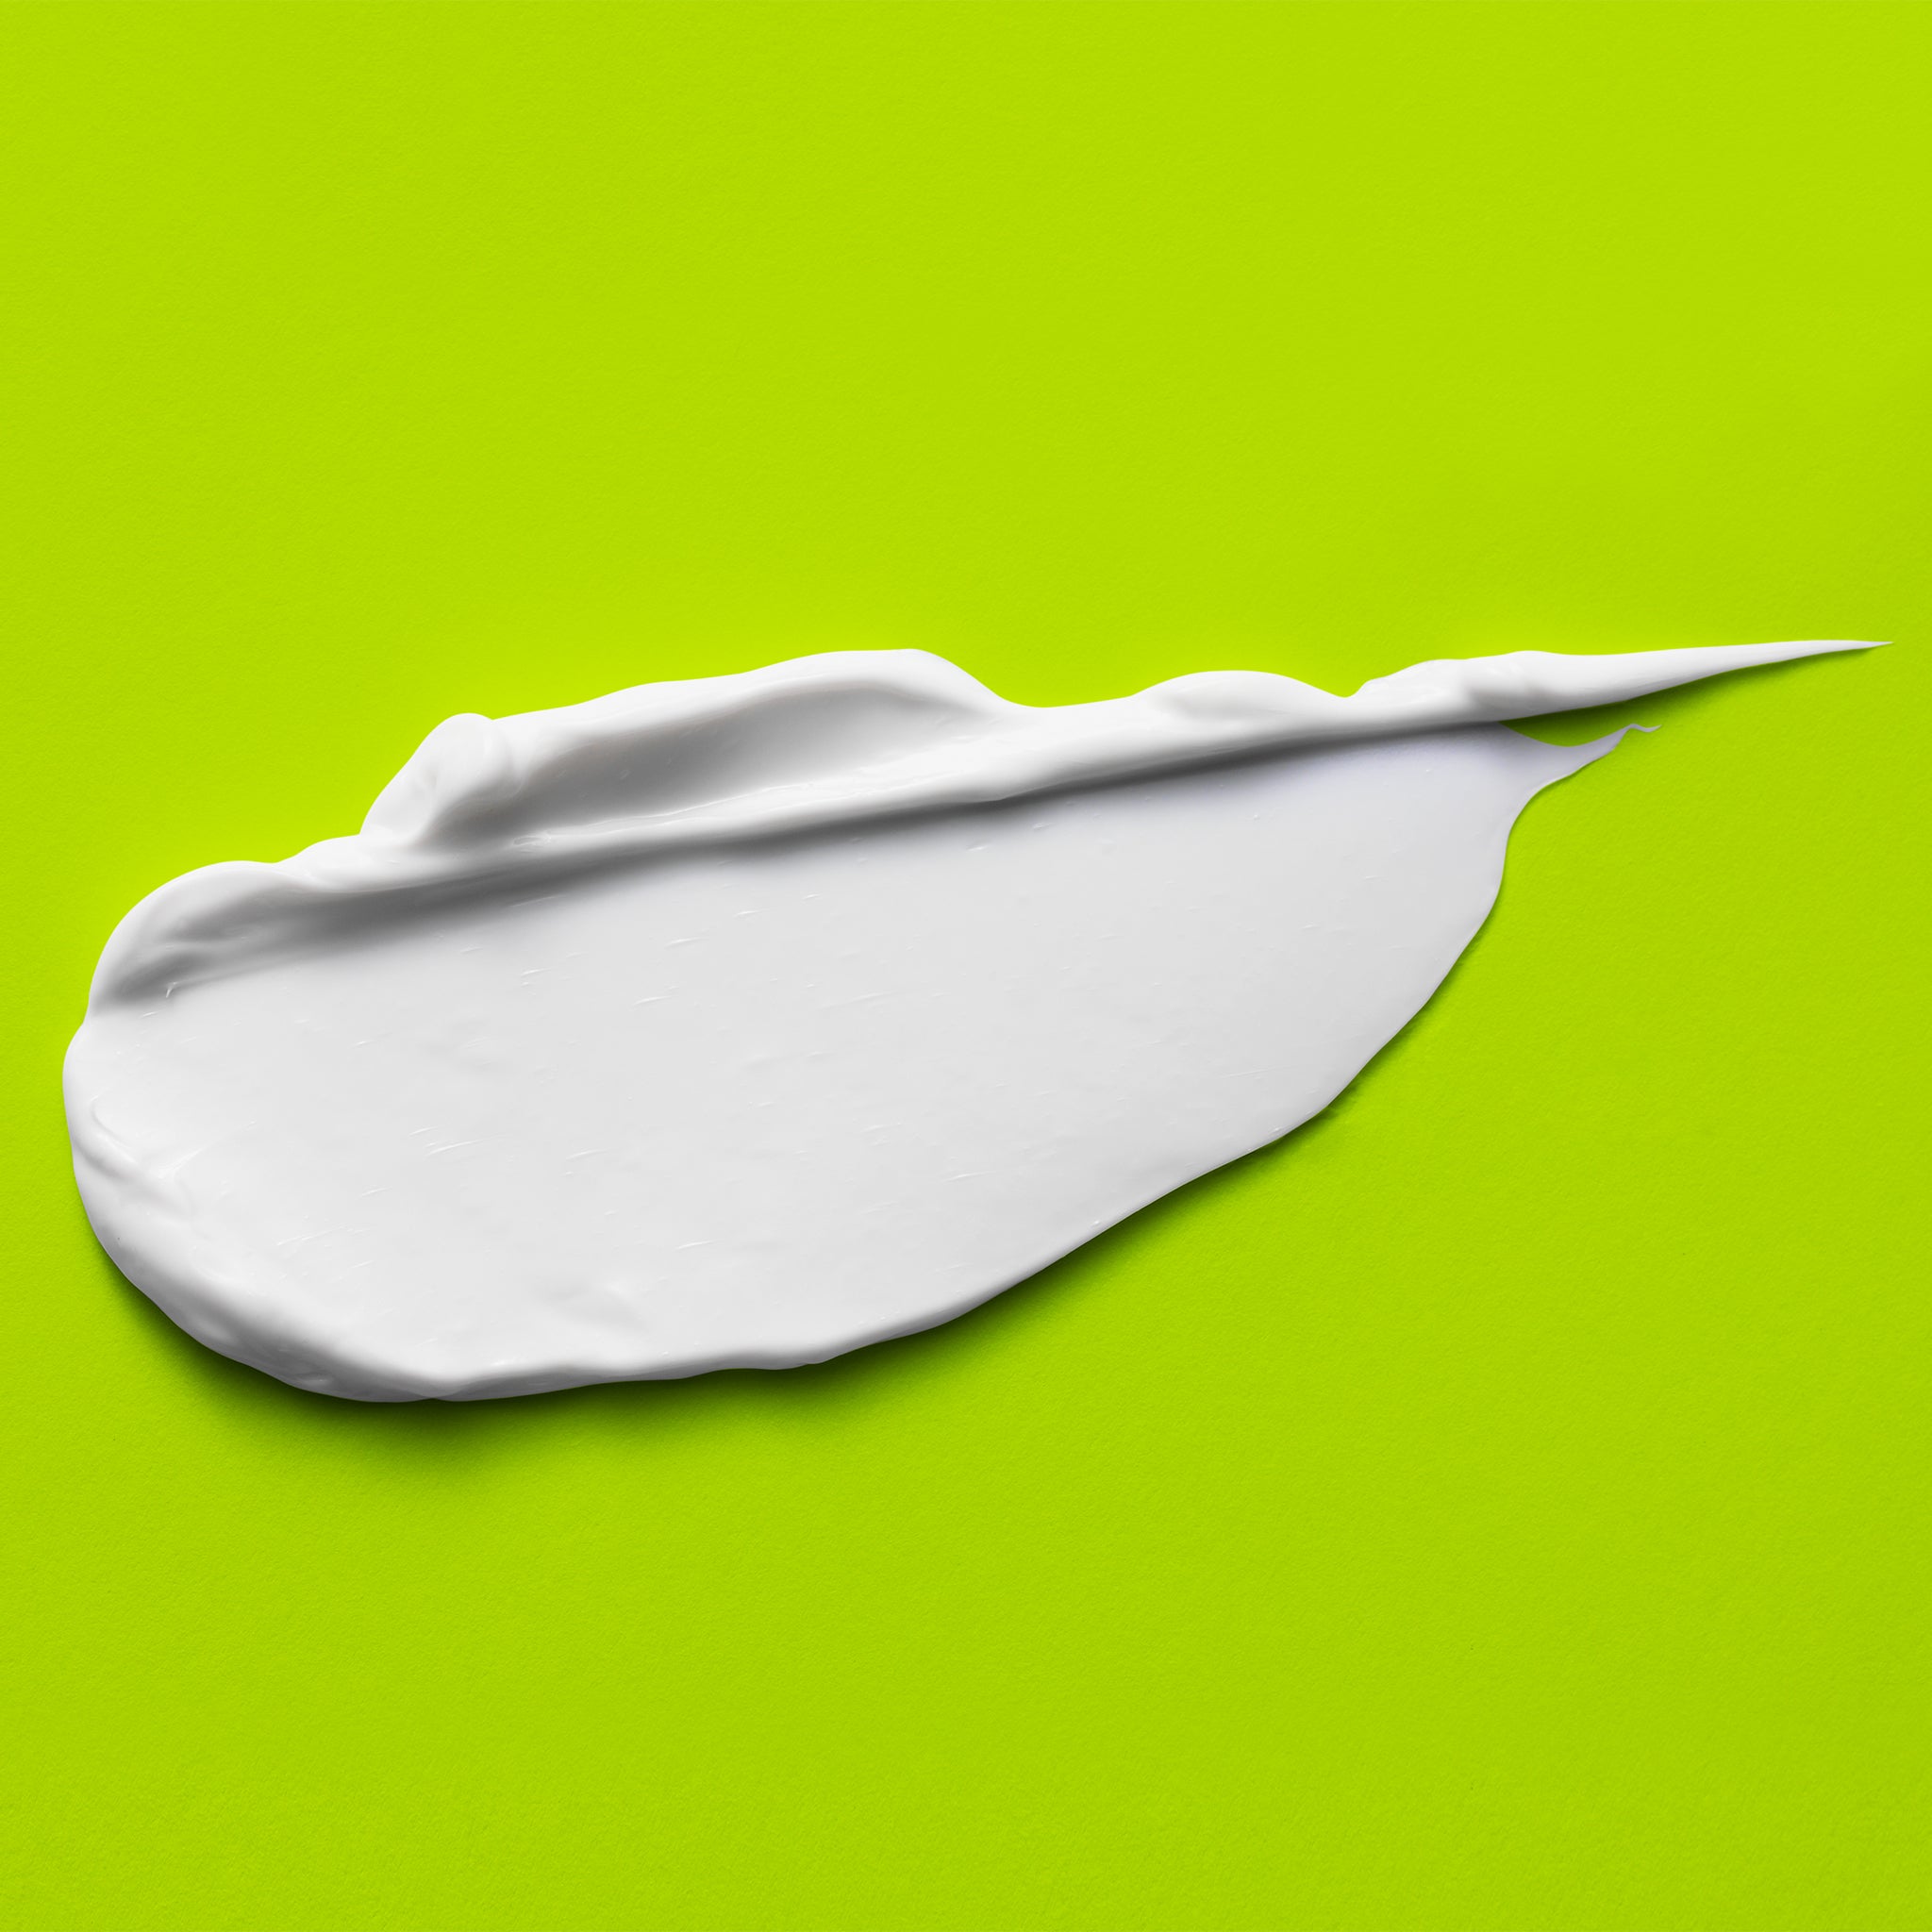 A smear of bright white cream on a bright lime-green background